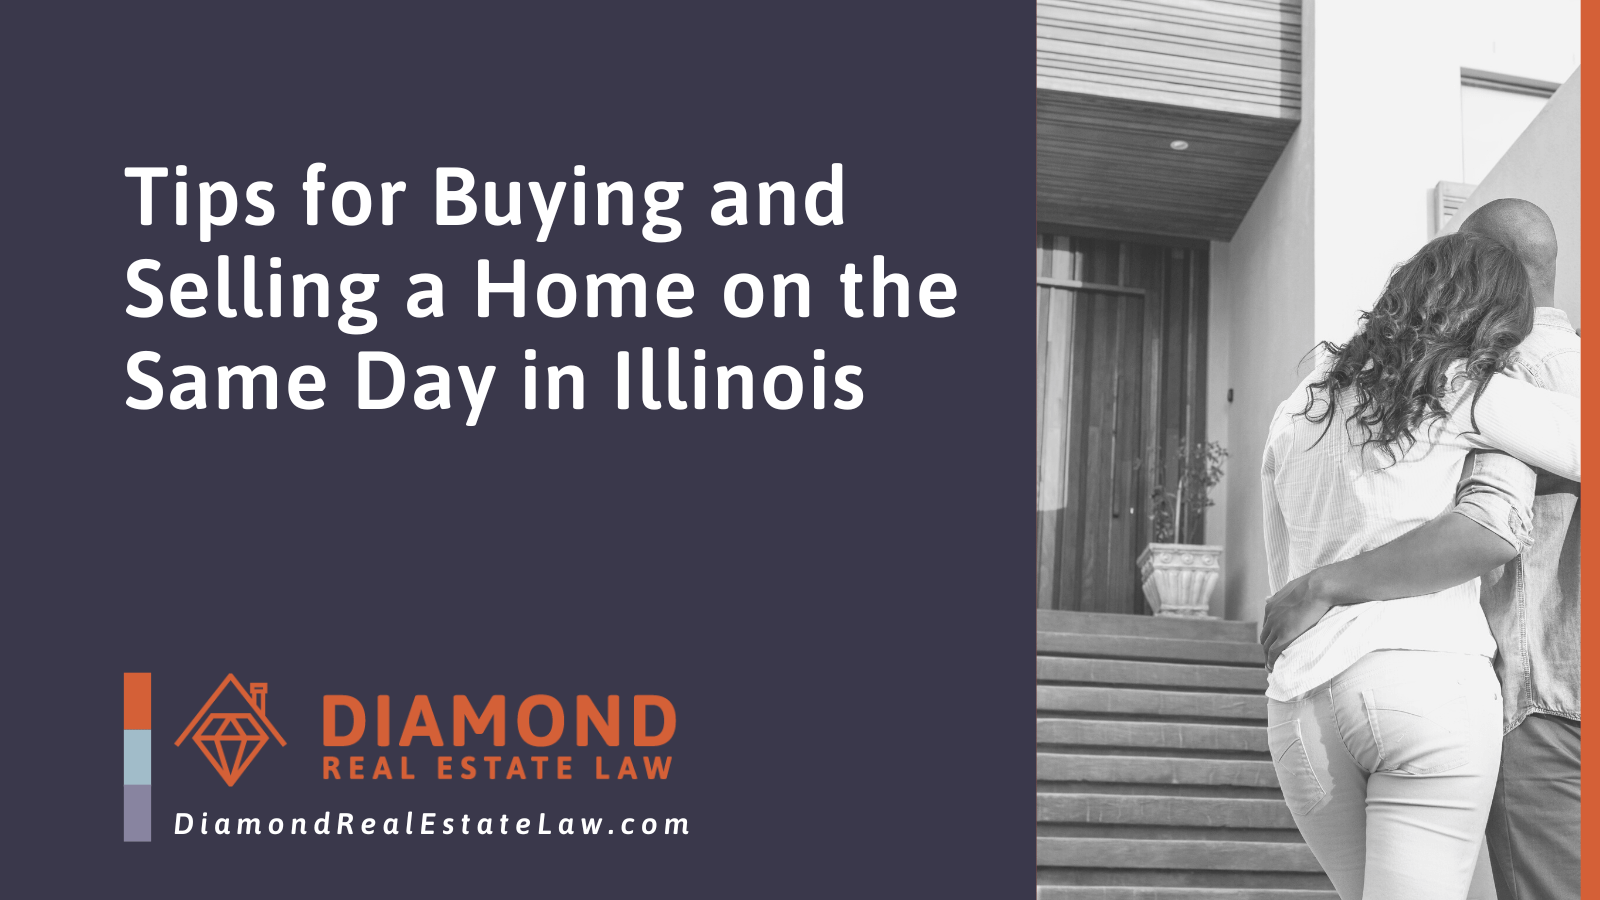 Tips for Buying and Selling a Home on the Same Day in Illinois - Diamond Real Estate Law | McHenry, IL Residential Real Estate Lawyer